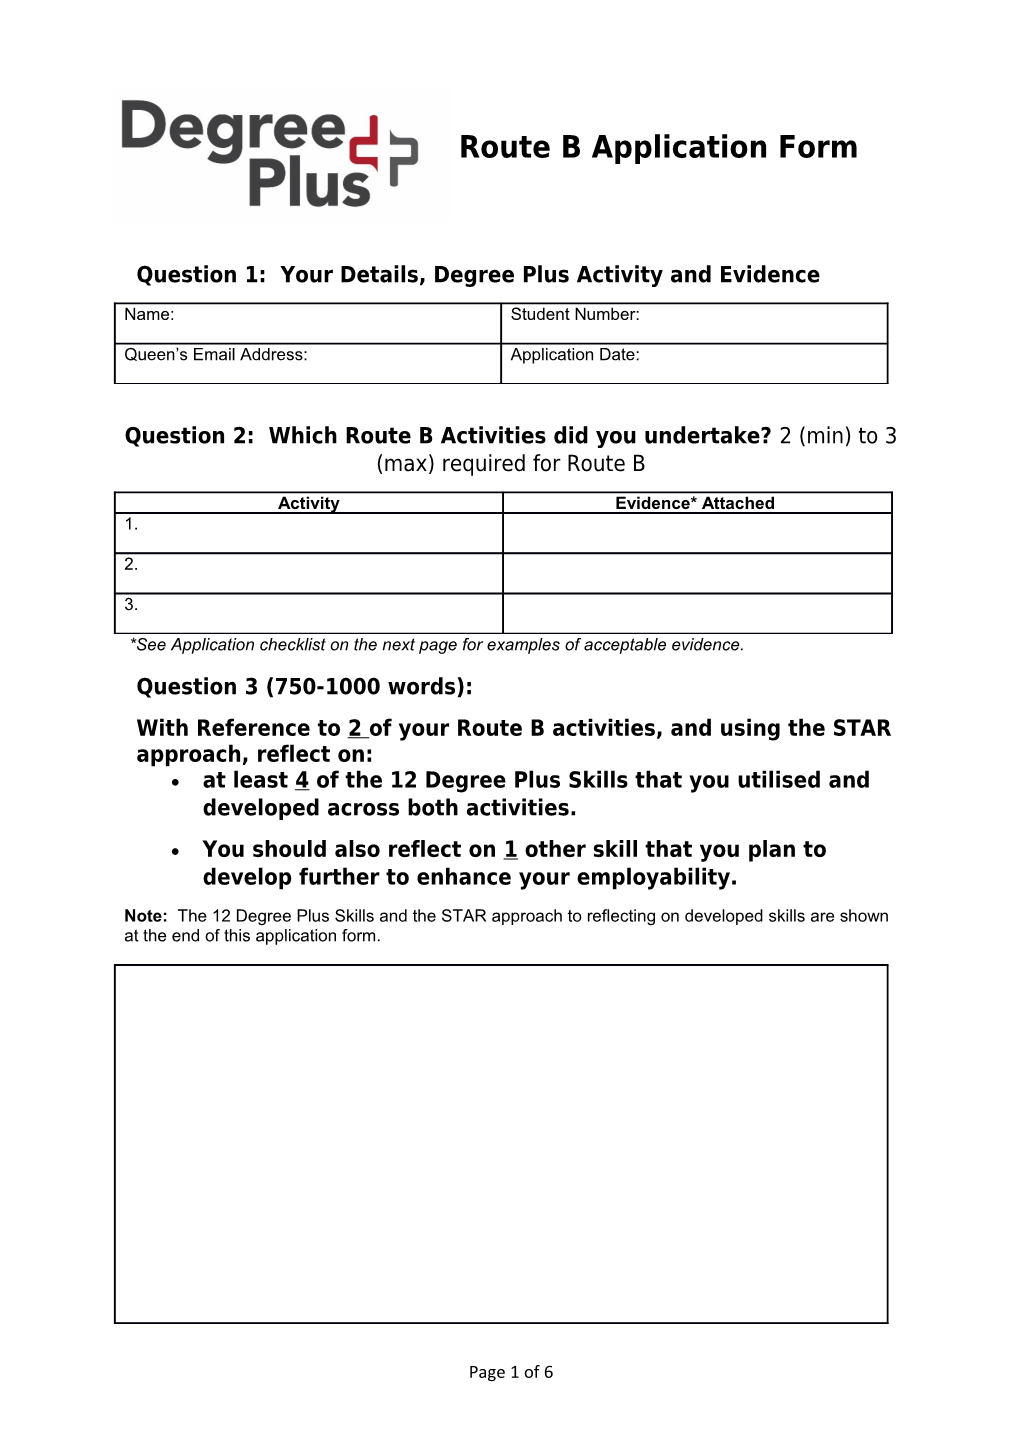 Question 1: Your Details, Degree Plus Activity and Evidence